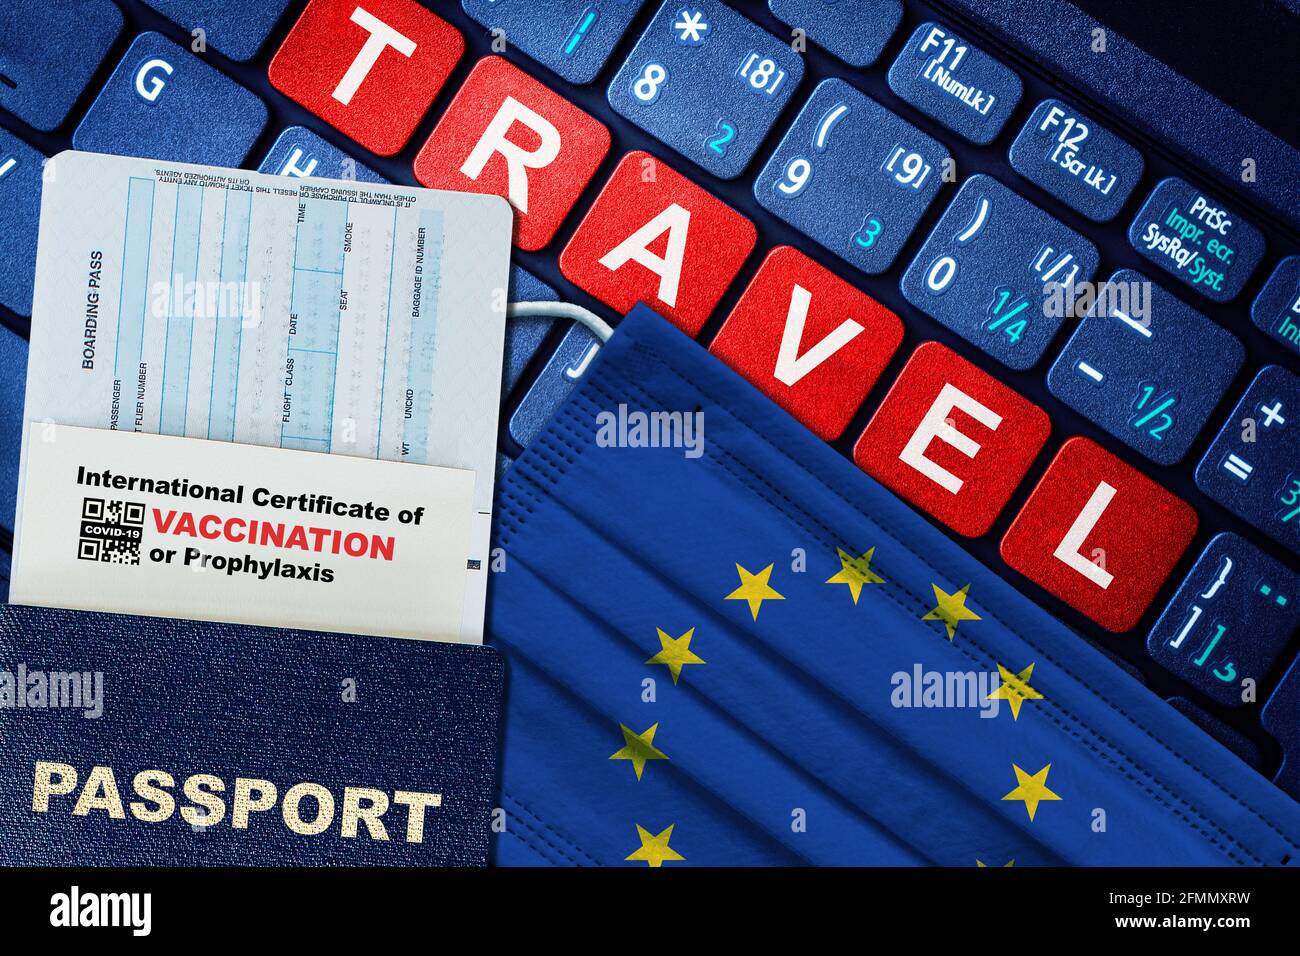 European Union new normal travel concept with passport, boarding pass, face mask with EU flag and certificate of COVID-19 vaccination on keyboard. Vac Stock Photo